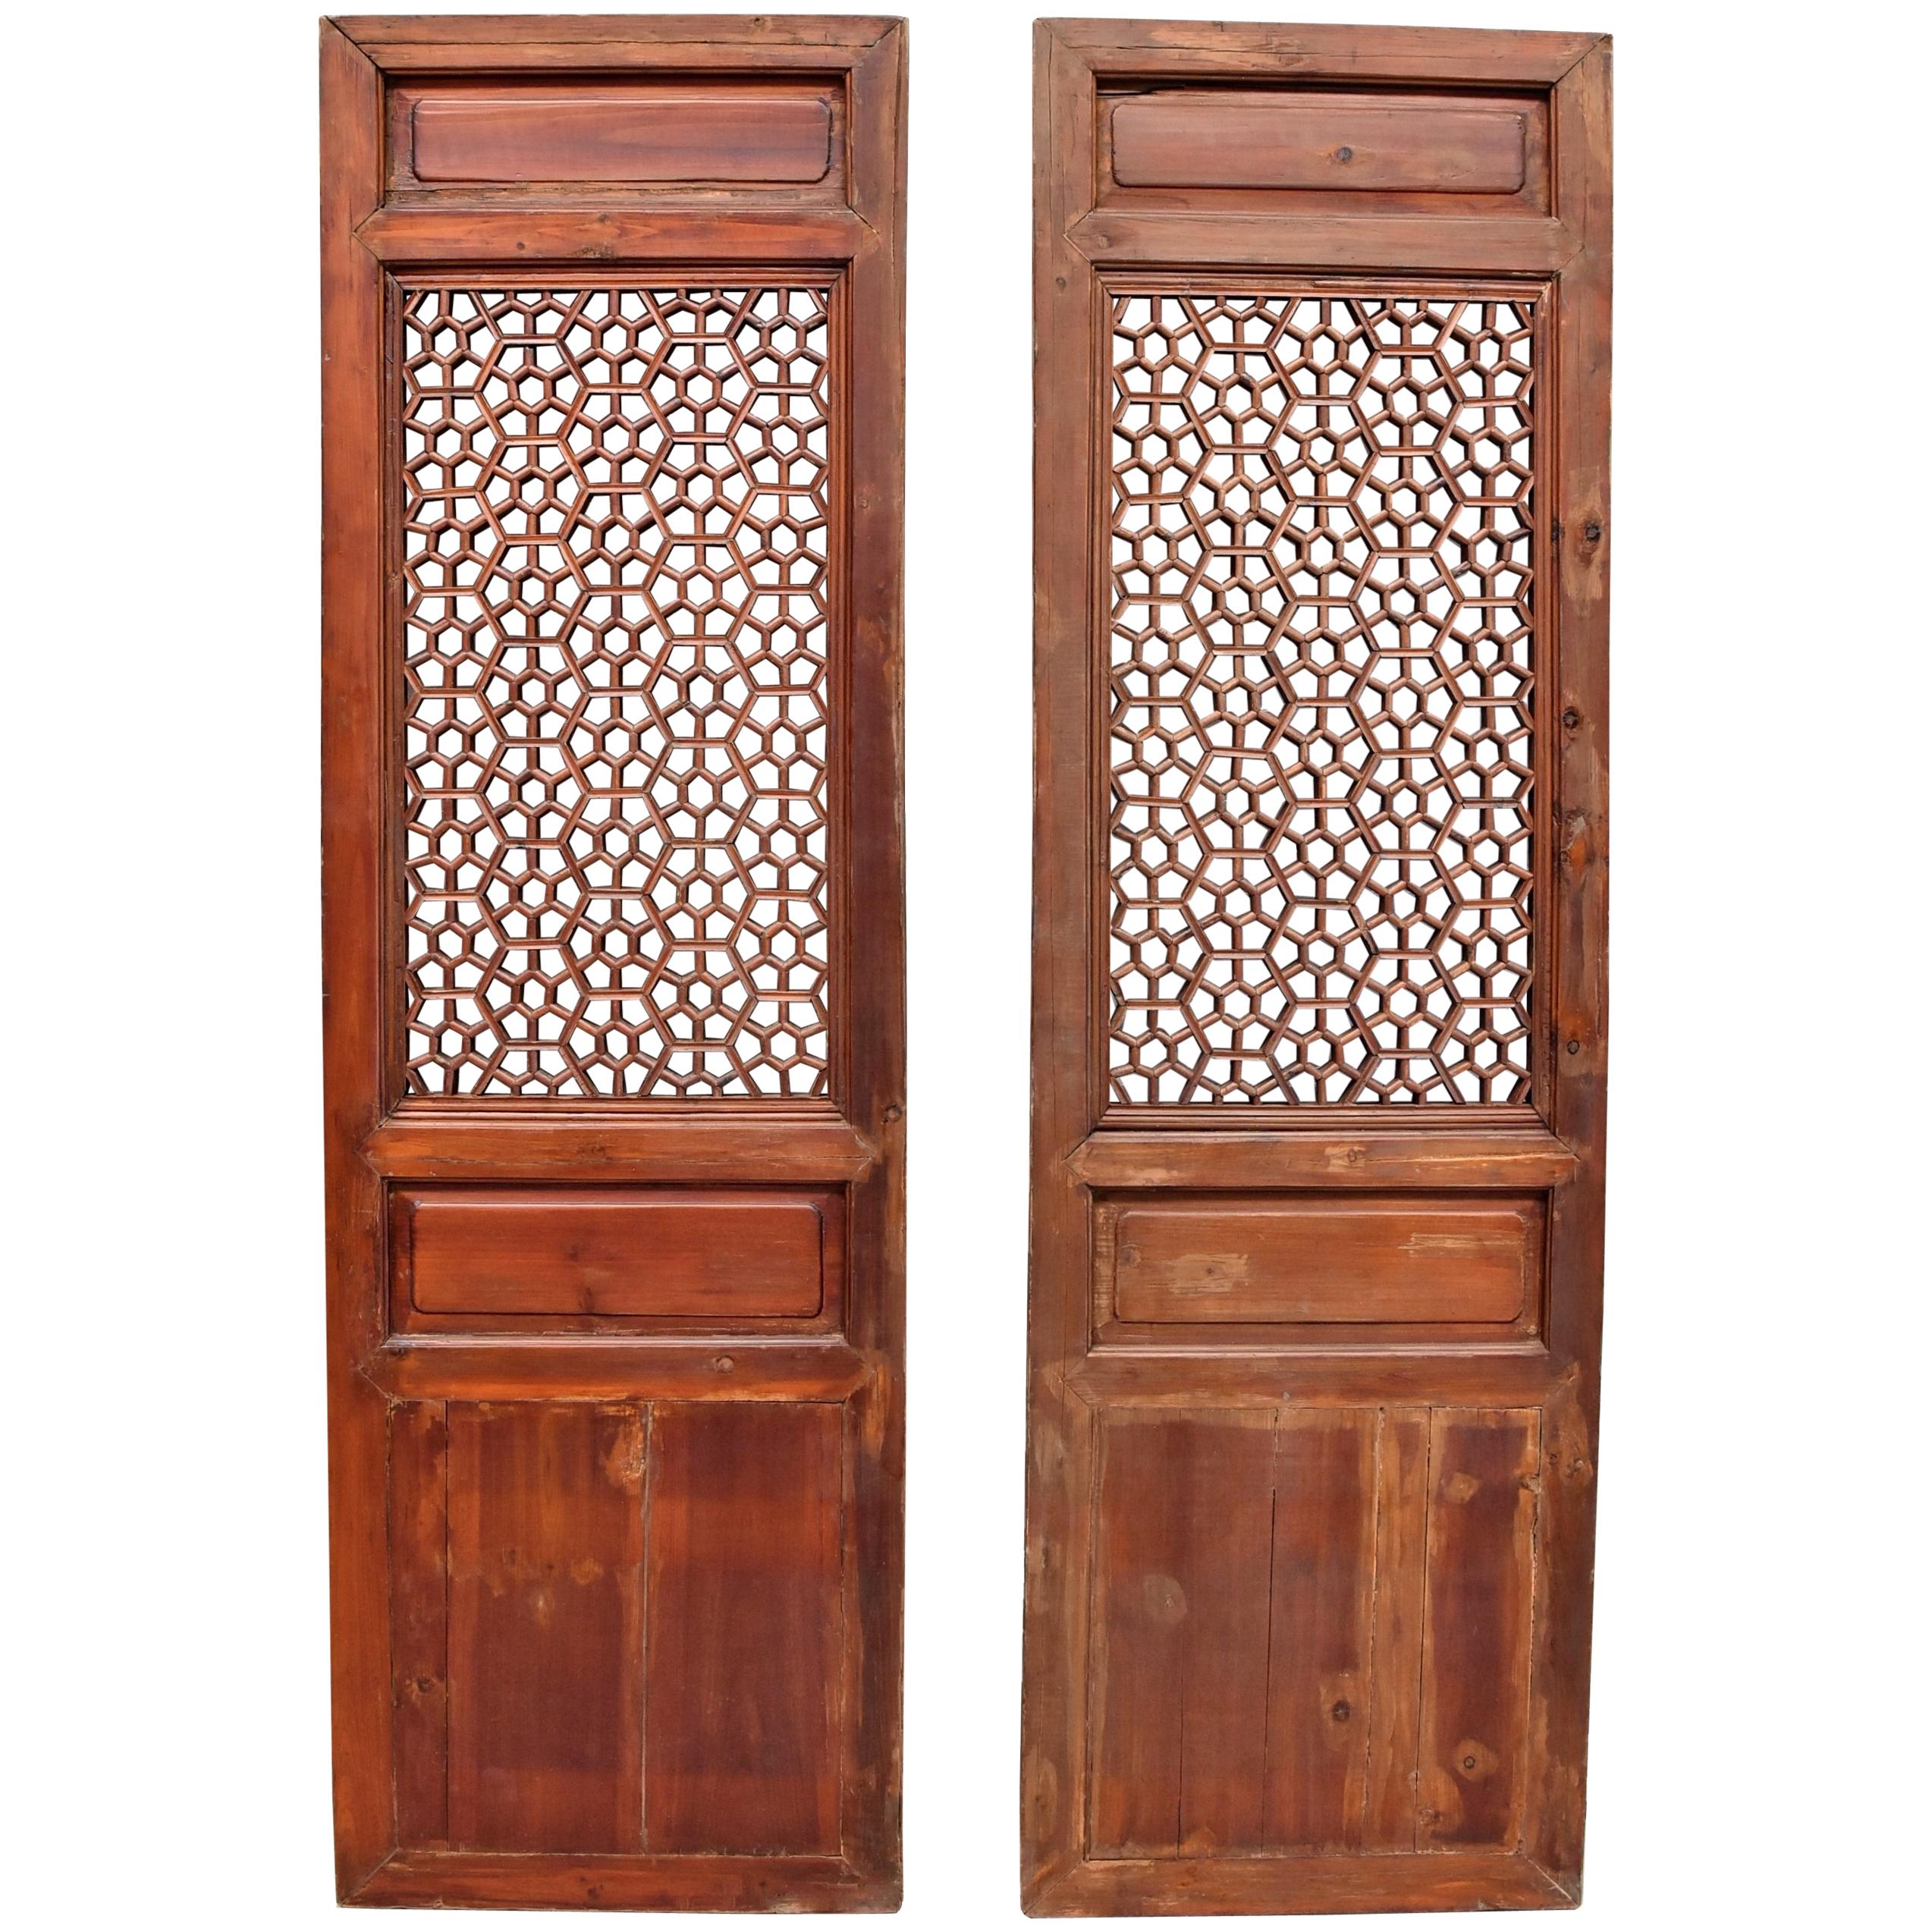 Pair of Antique Chinese Screens, Octagon Wheel Pattern